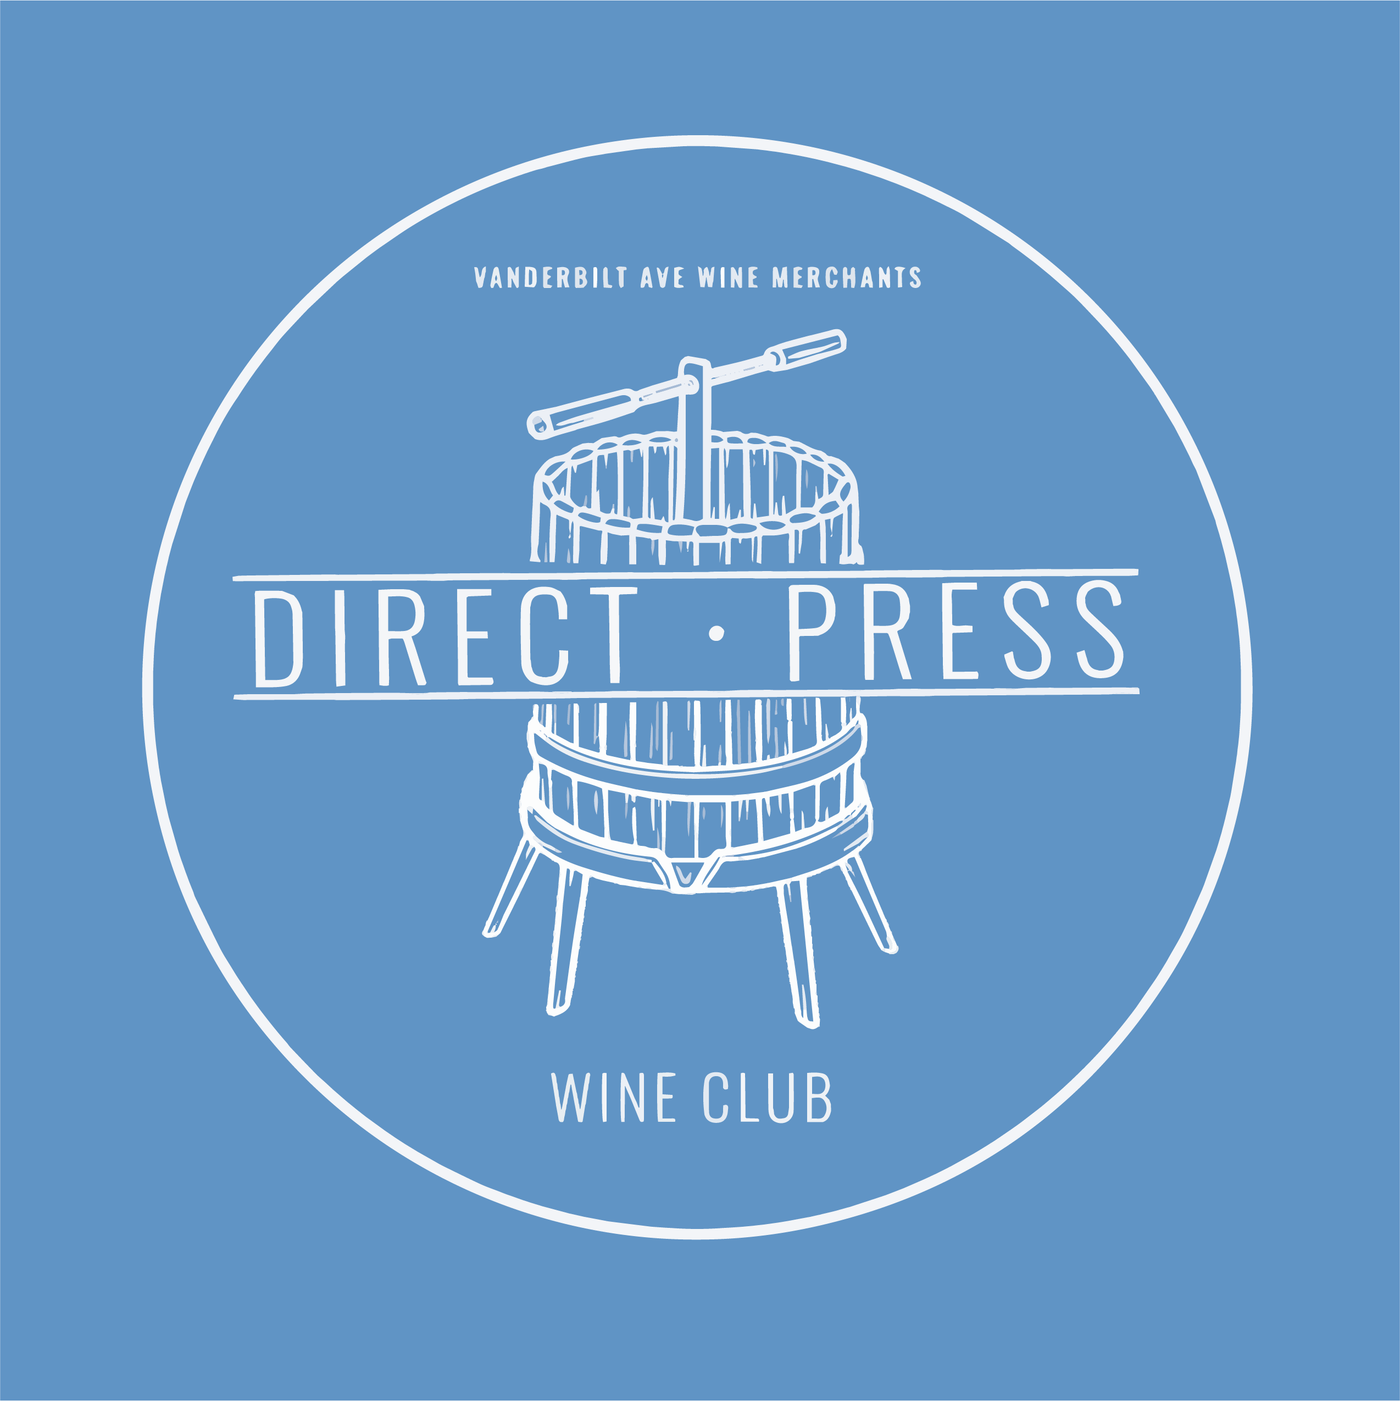 DIRECT PRESS • 1 MONTH GIFT